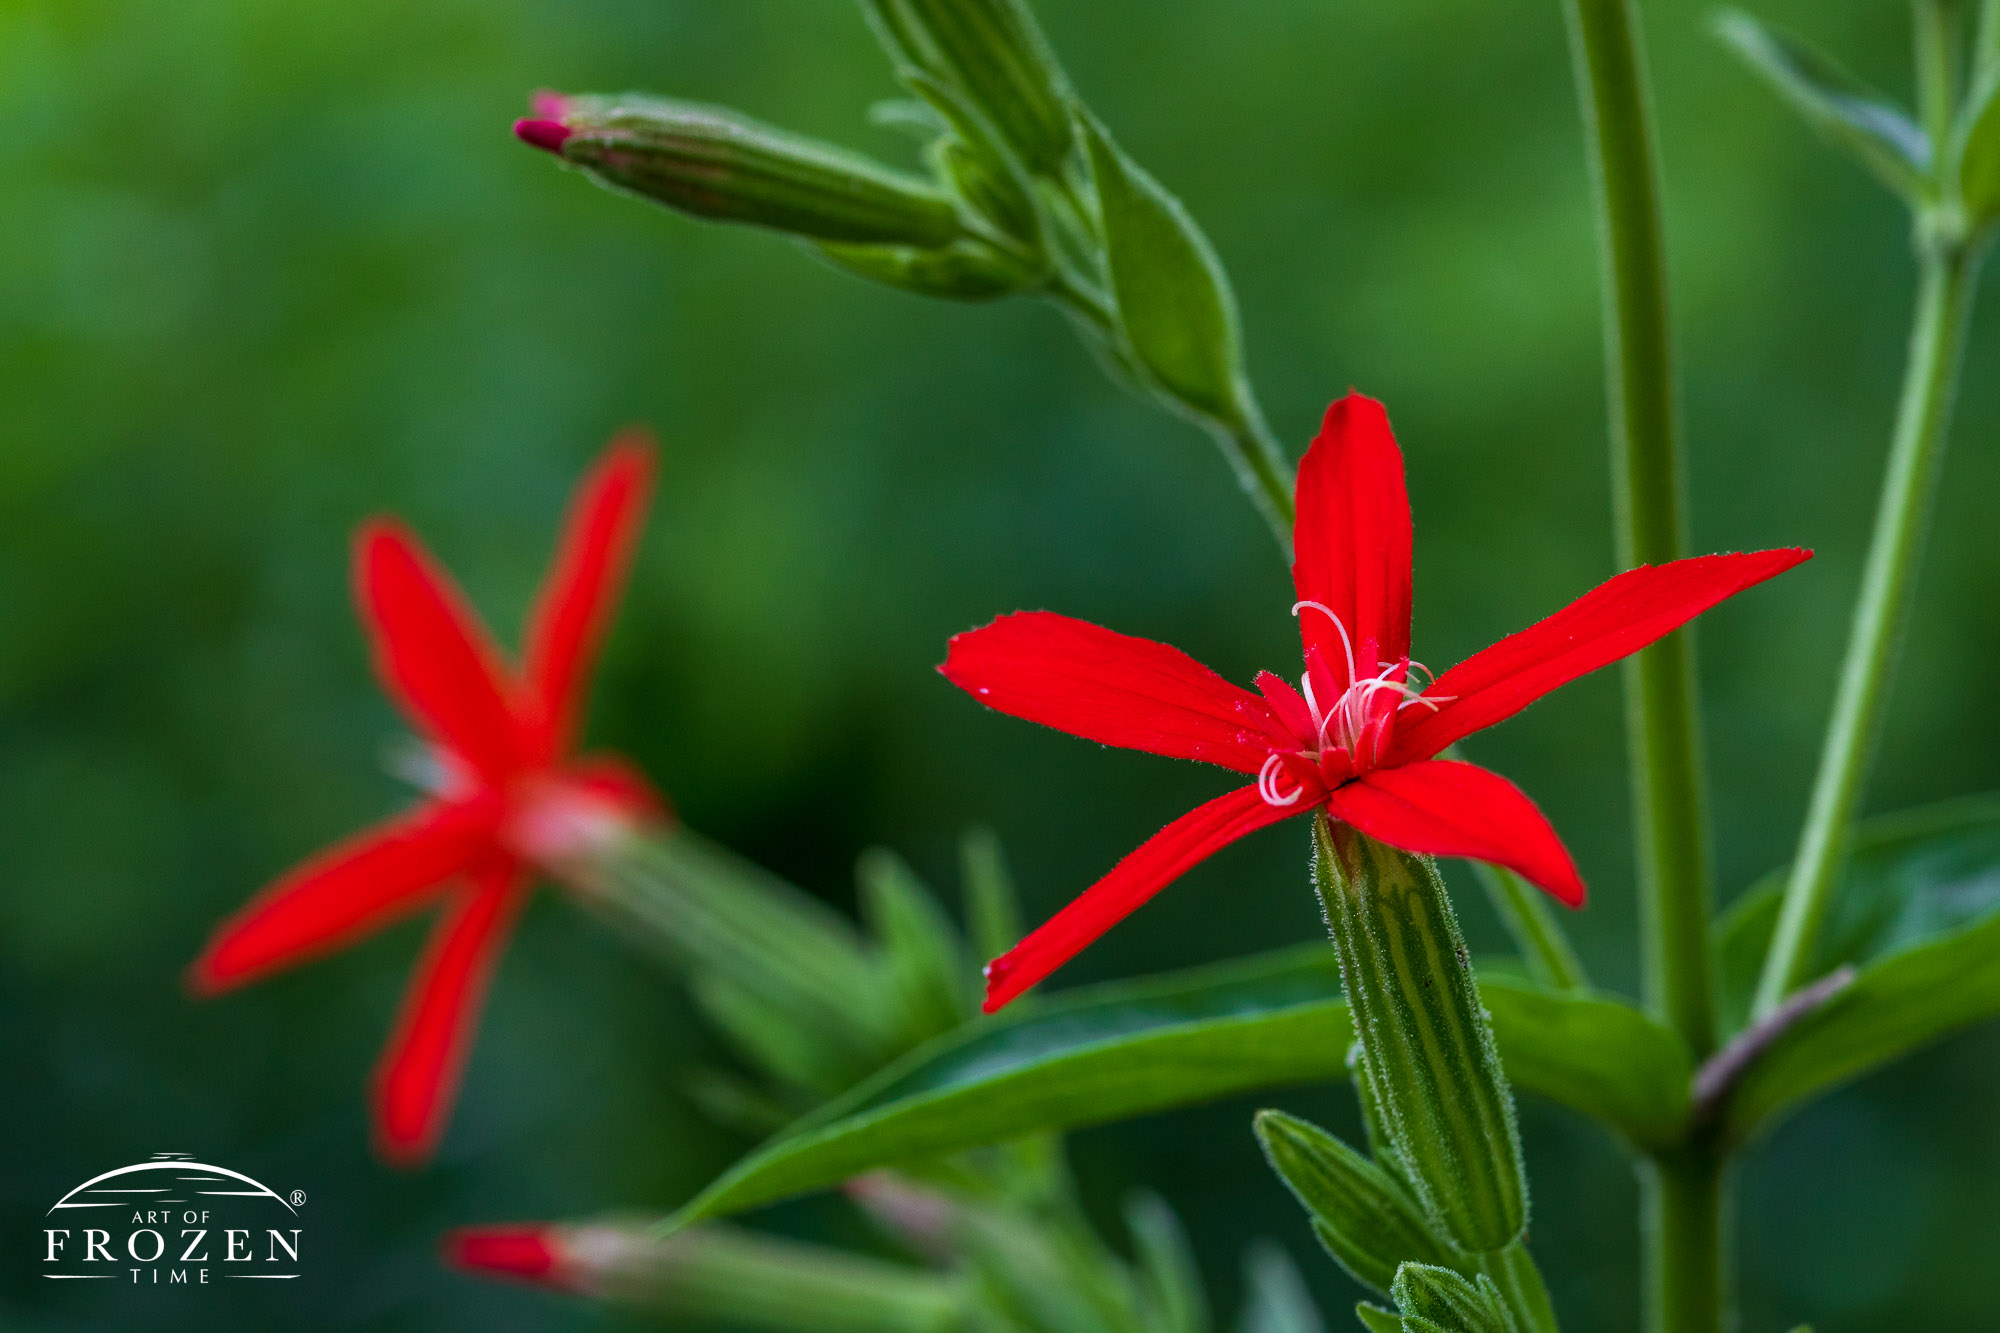 An endangered Royal Catchfly featuring 5 red petals and white sticky glands which trap insects.